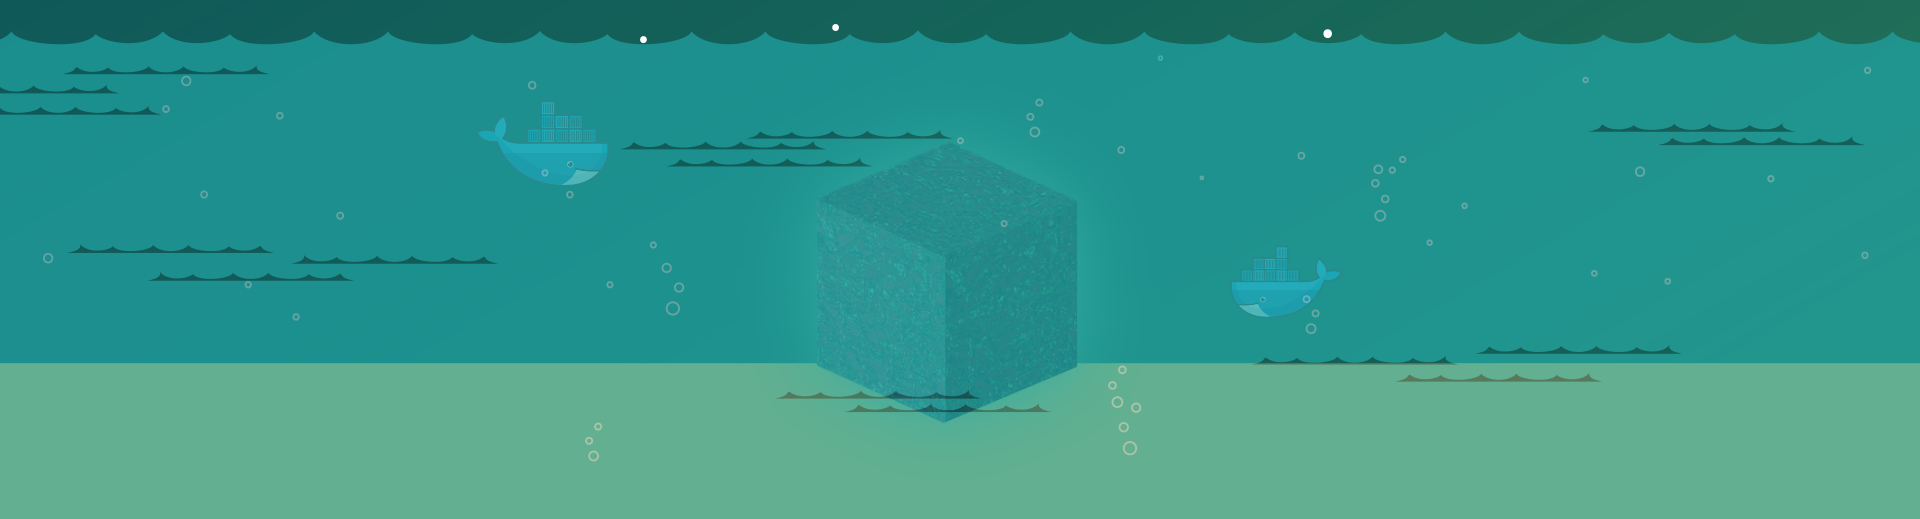 The Borg cube submerged on the ocean floor as Docker whales swim nearby